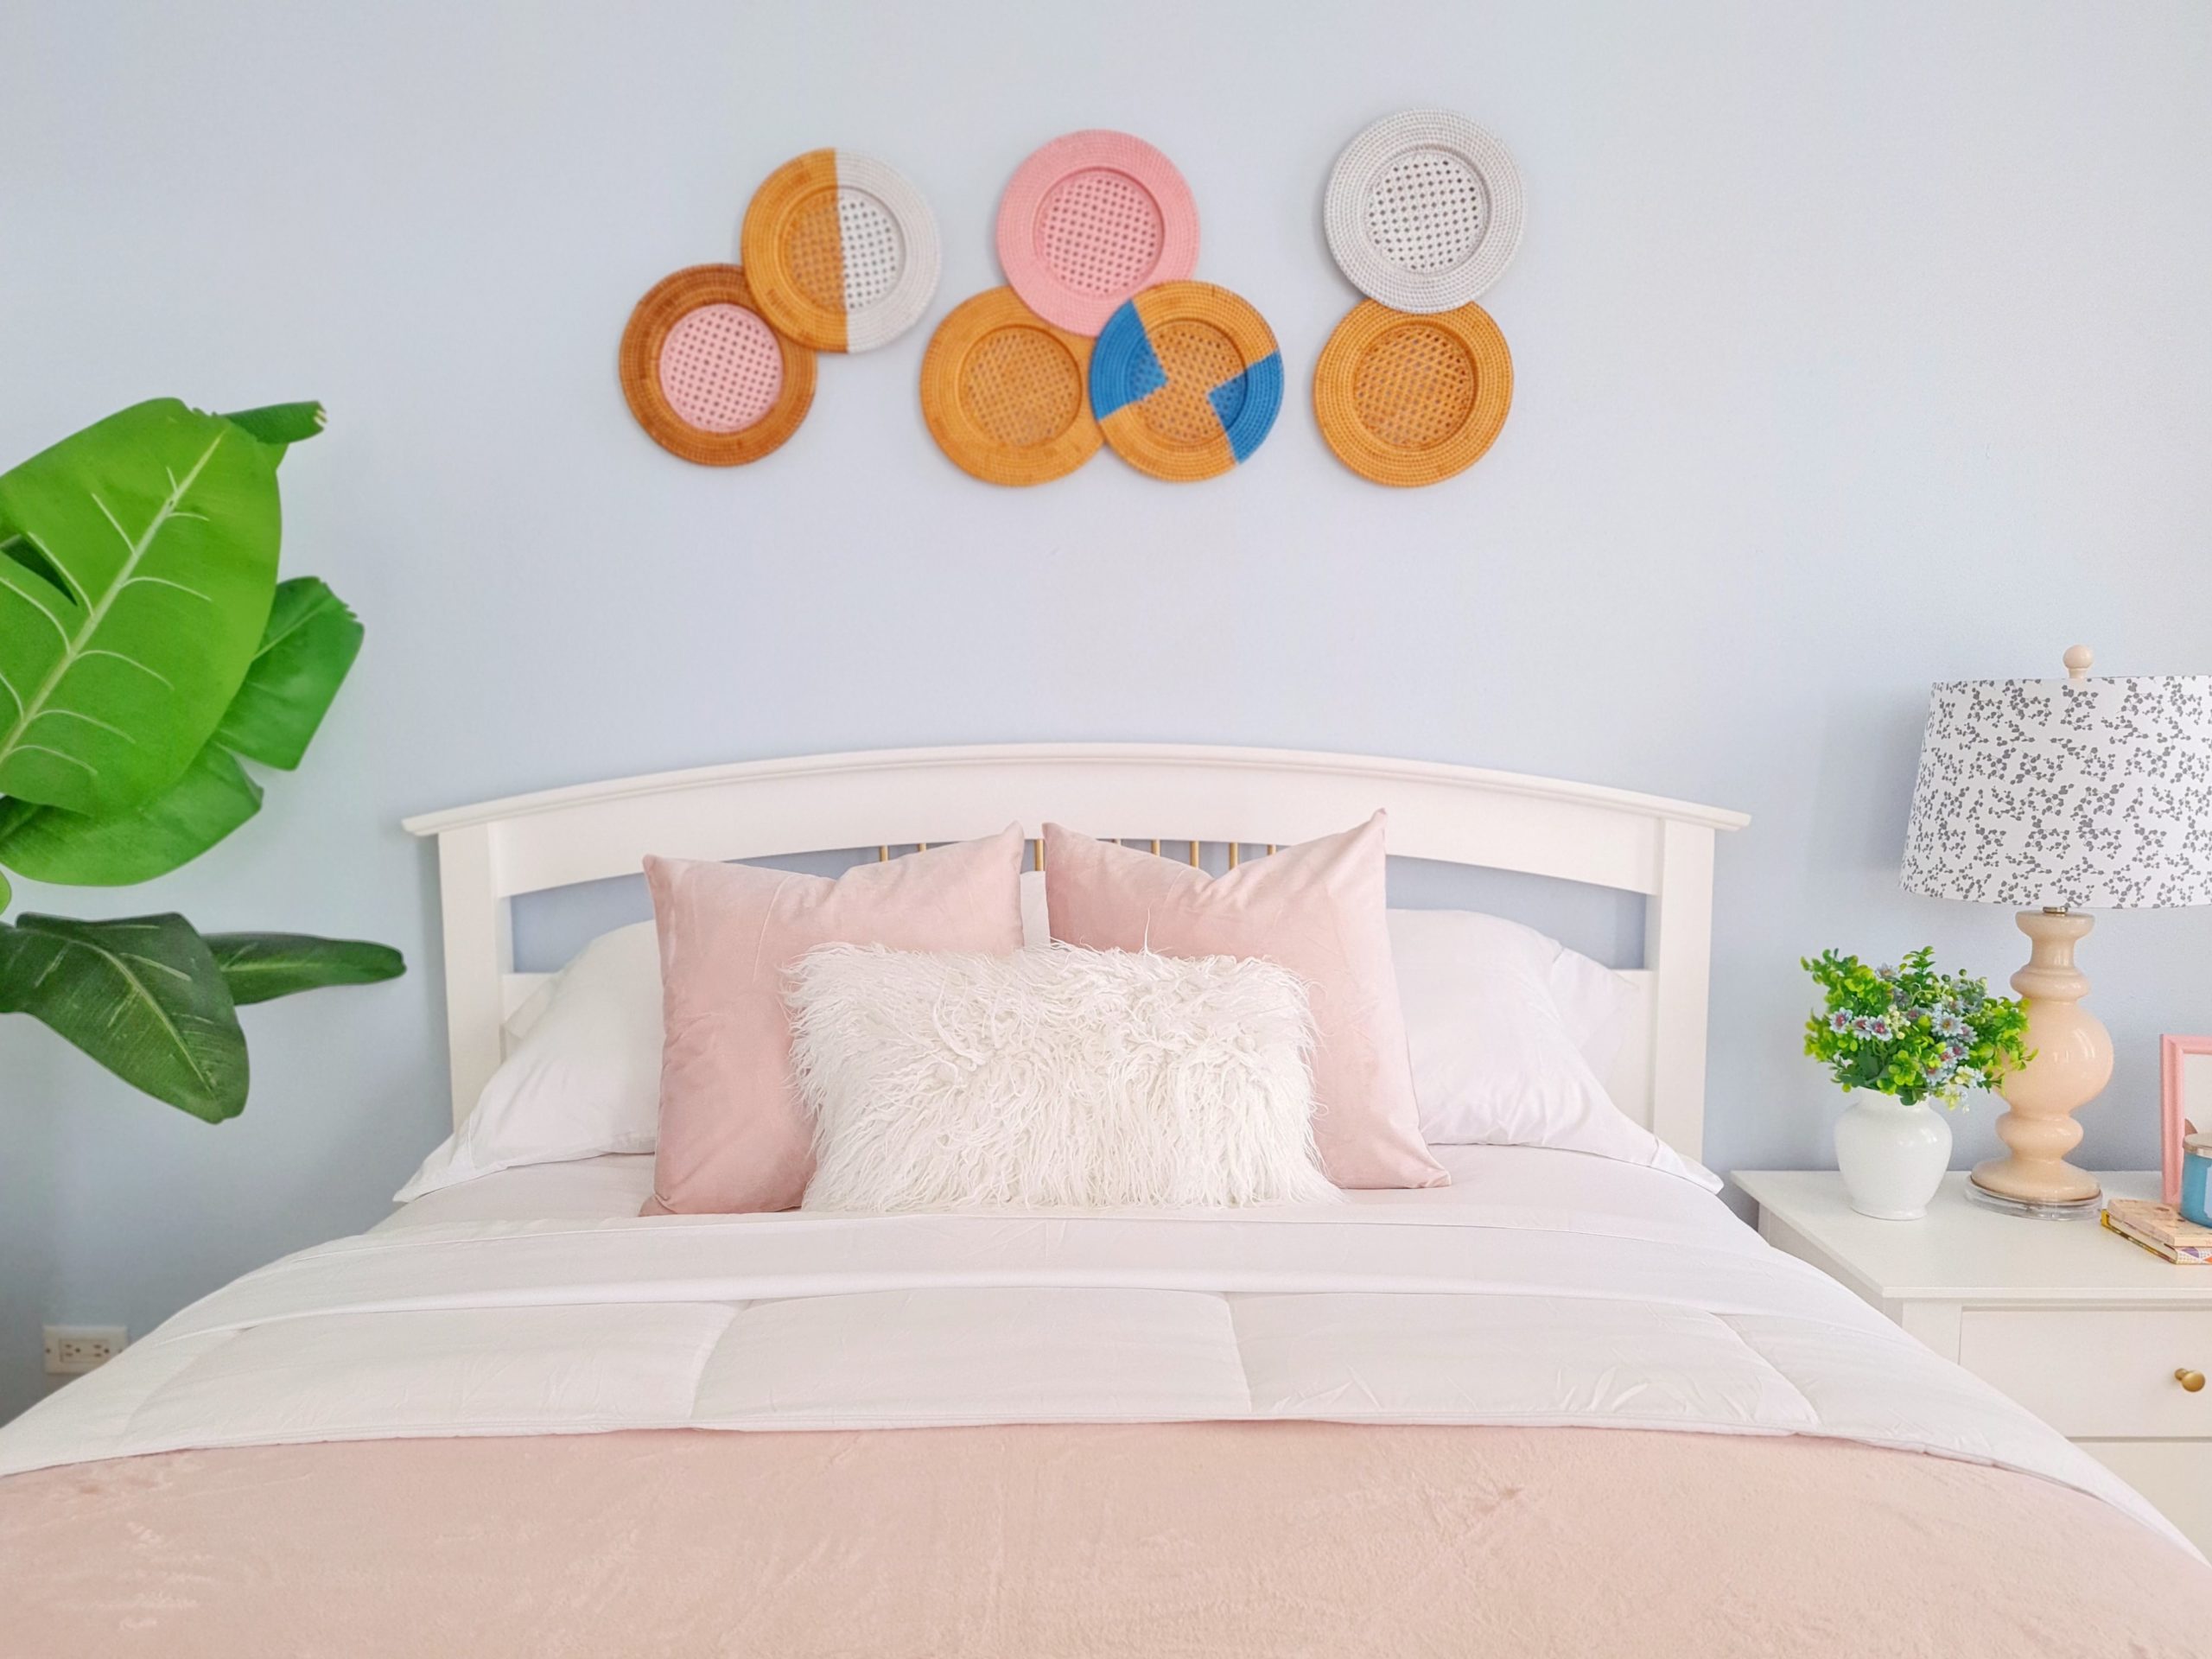 Dreamy coastal bedroom with sky blue walls and pastel pink décor.